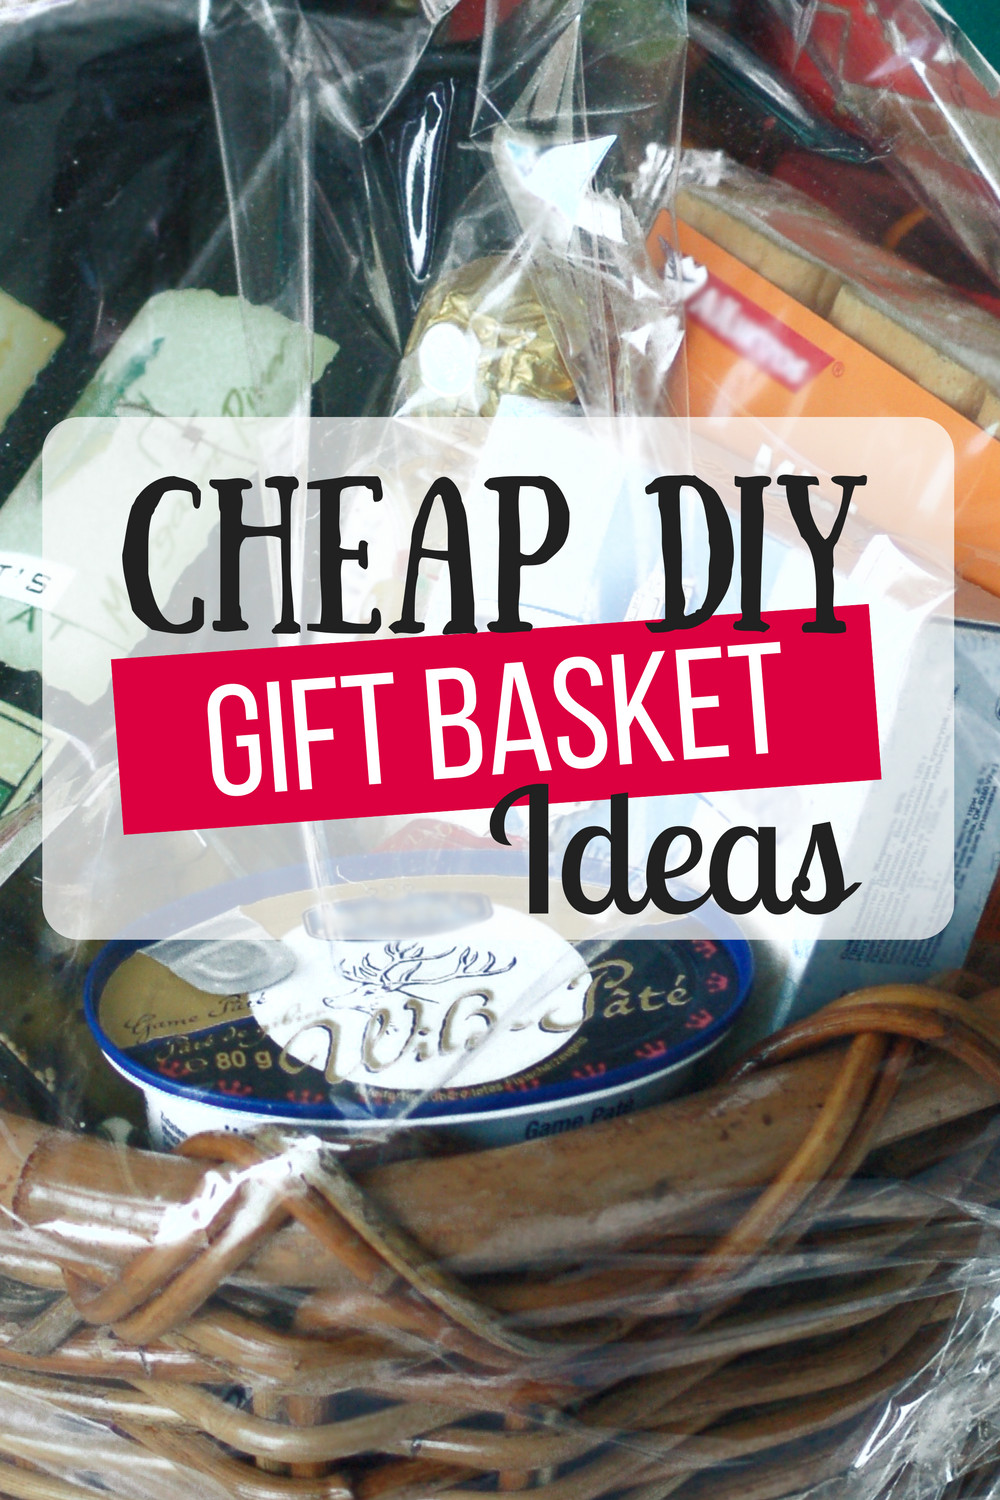 How To Make Gift Baskets Ideas
 Cheap DIY Gift Baskets The Busy Bud er